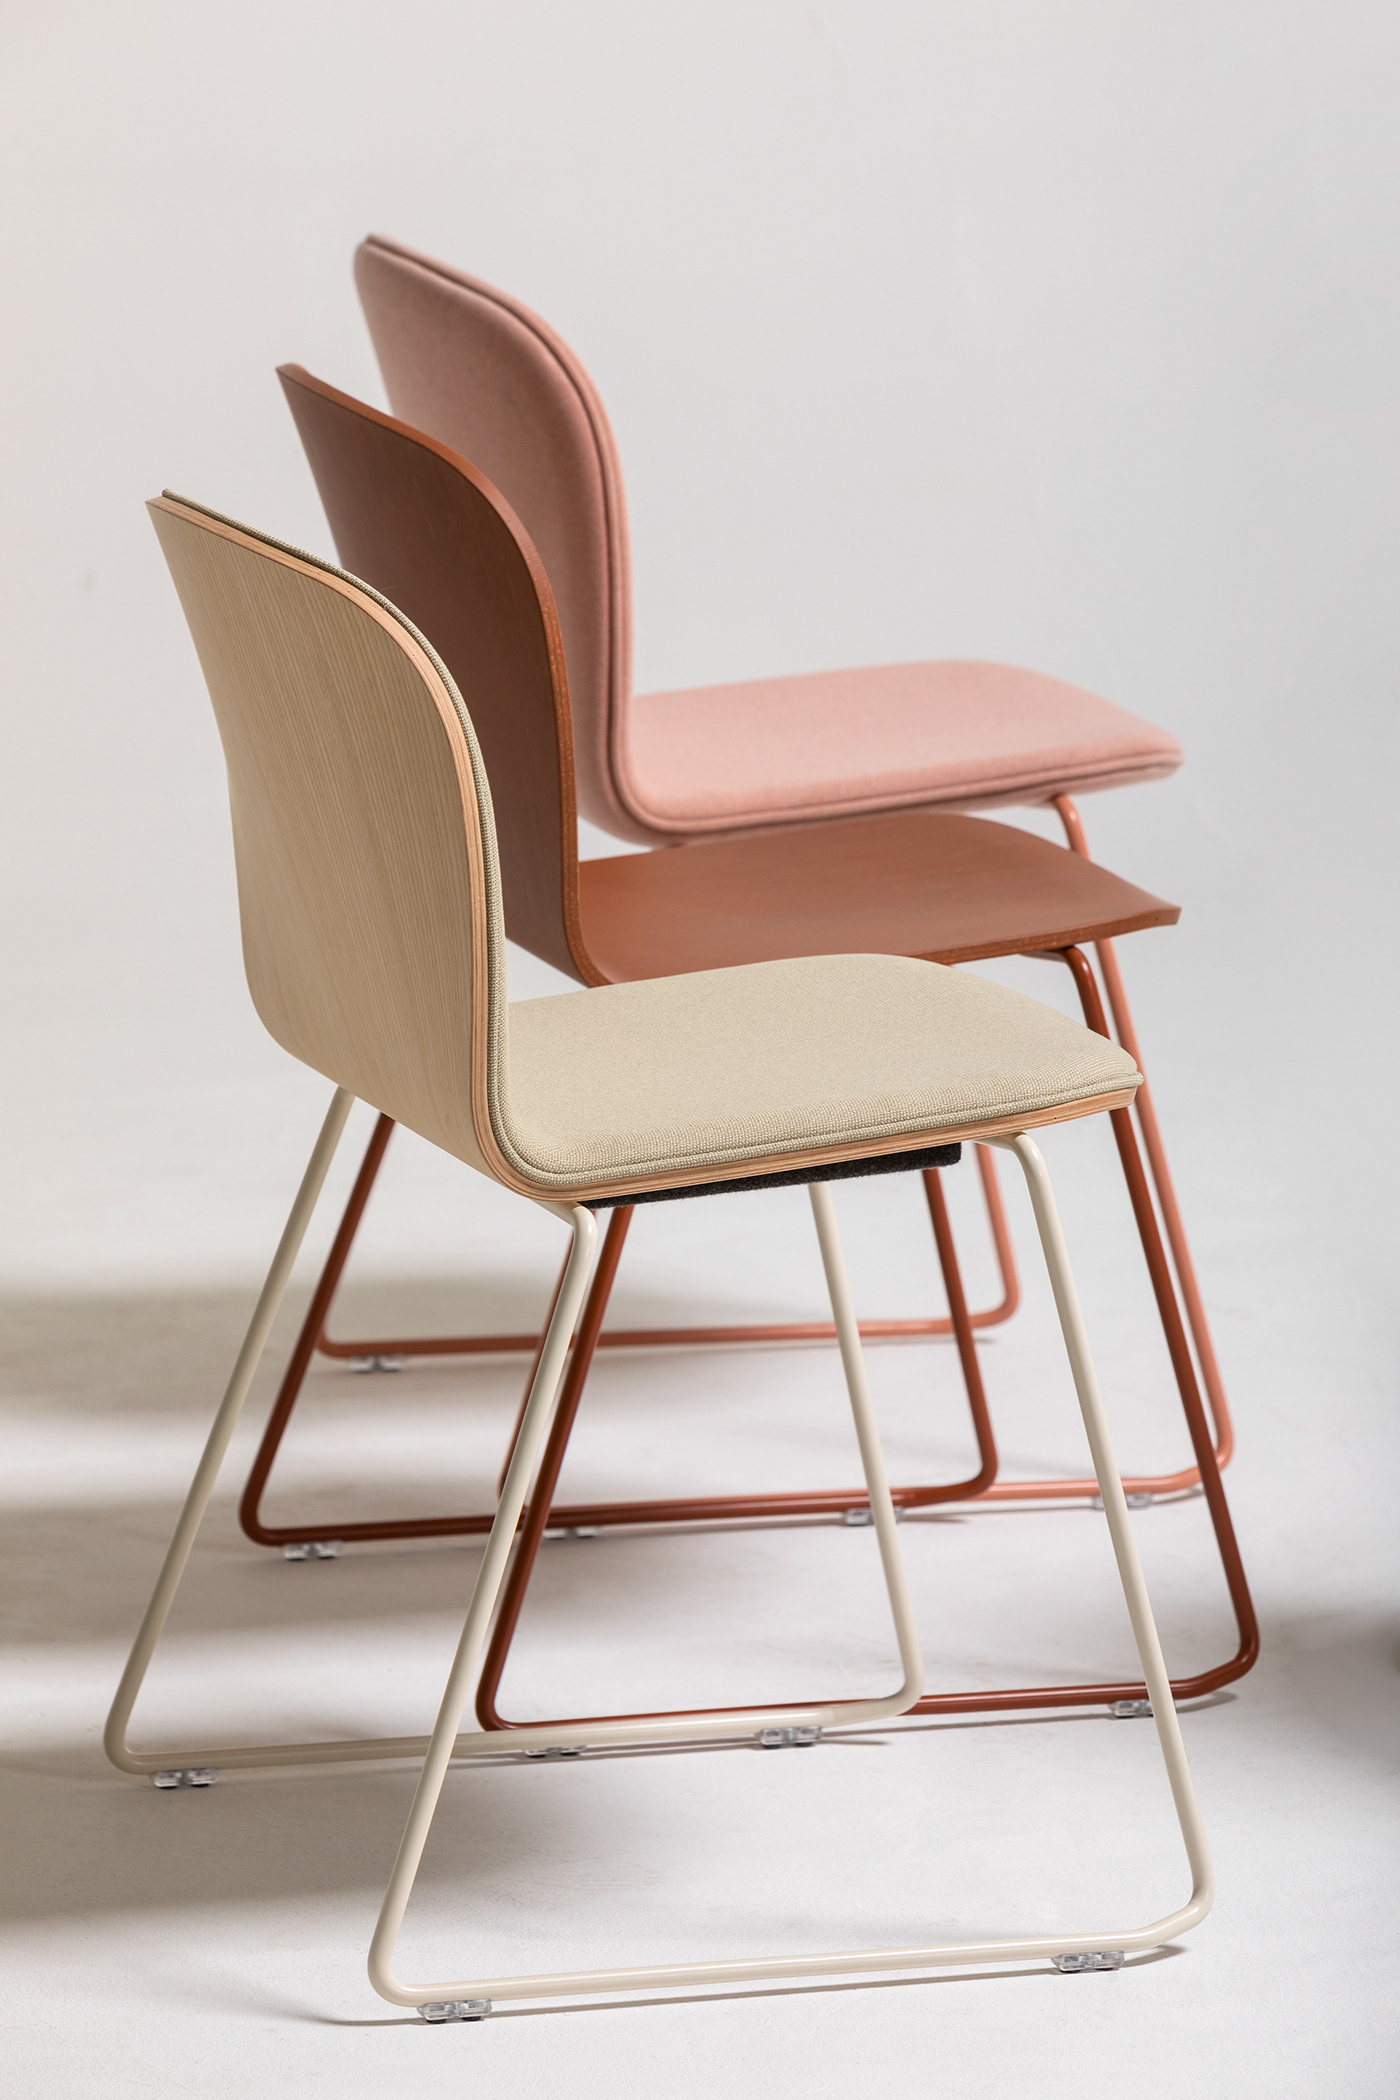 #contractchair plywoodfurniture stackable chair upholstery